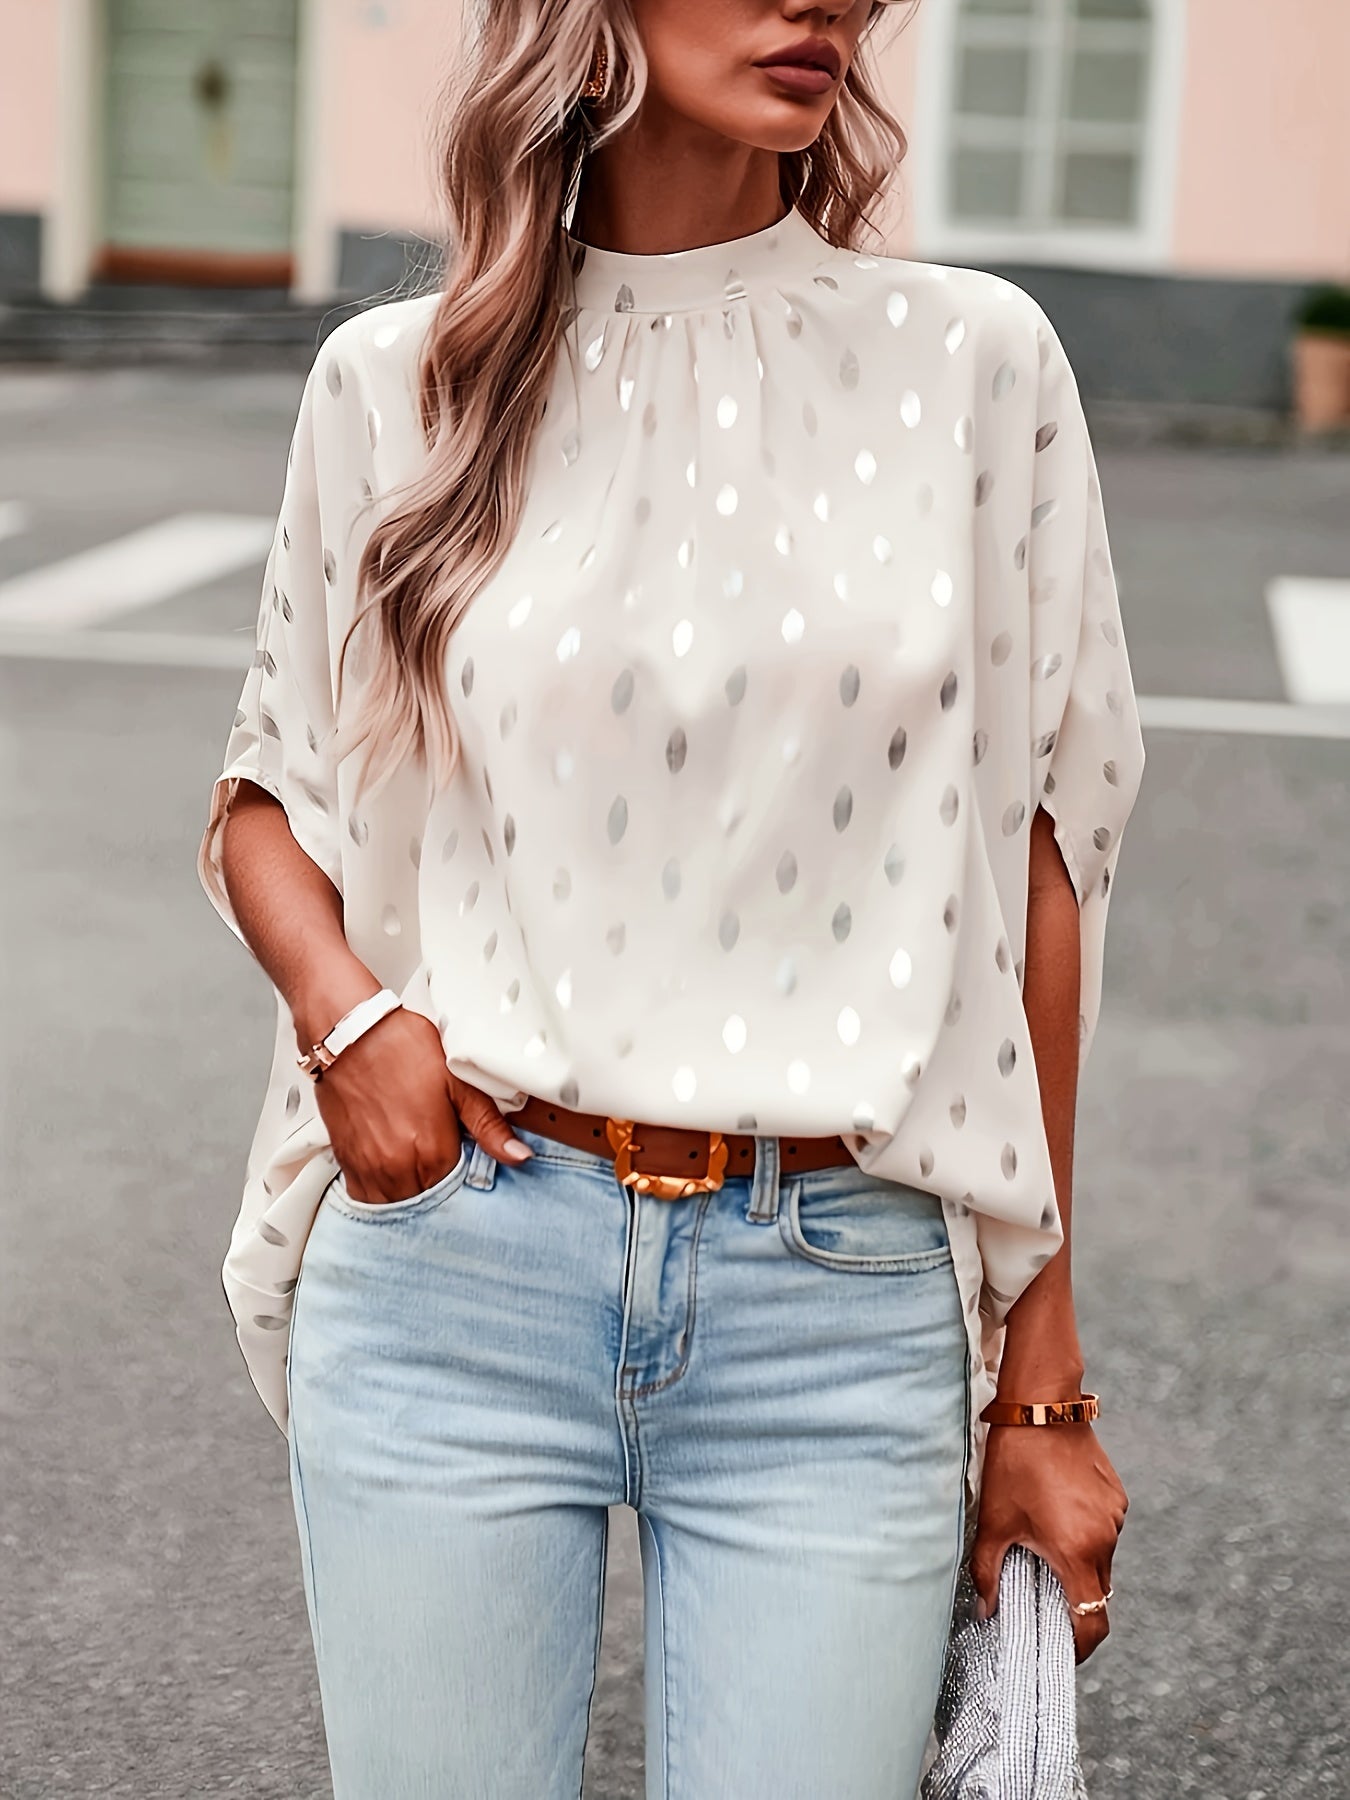 Plus Size Polka Dot Delight - Flattering Crew Neck Blouse with 3/4 Sleeves - Versatile Casual Wear for Spring to Fall - Womens Fashion Plus Size Clothing Staple